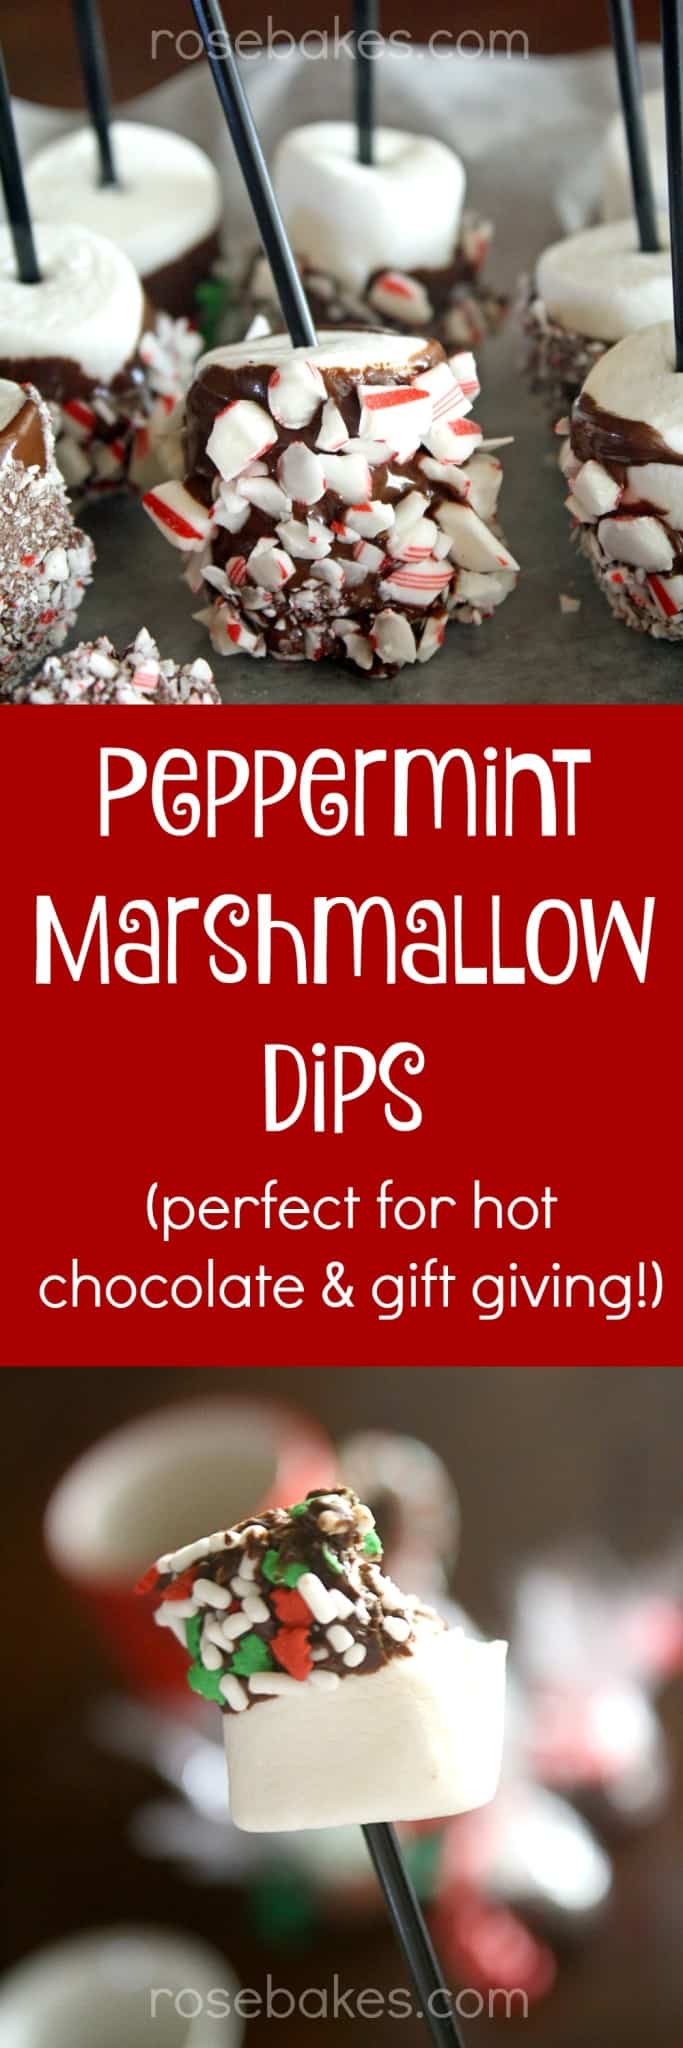 Peppermint Marshmallow Dips! These are perfect for dipping in hot chocolate, eating right off the stick, or wrapping up to give as a gift with a coffee mug & hot chocolate!